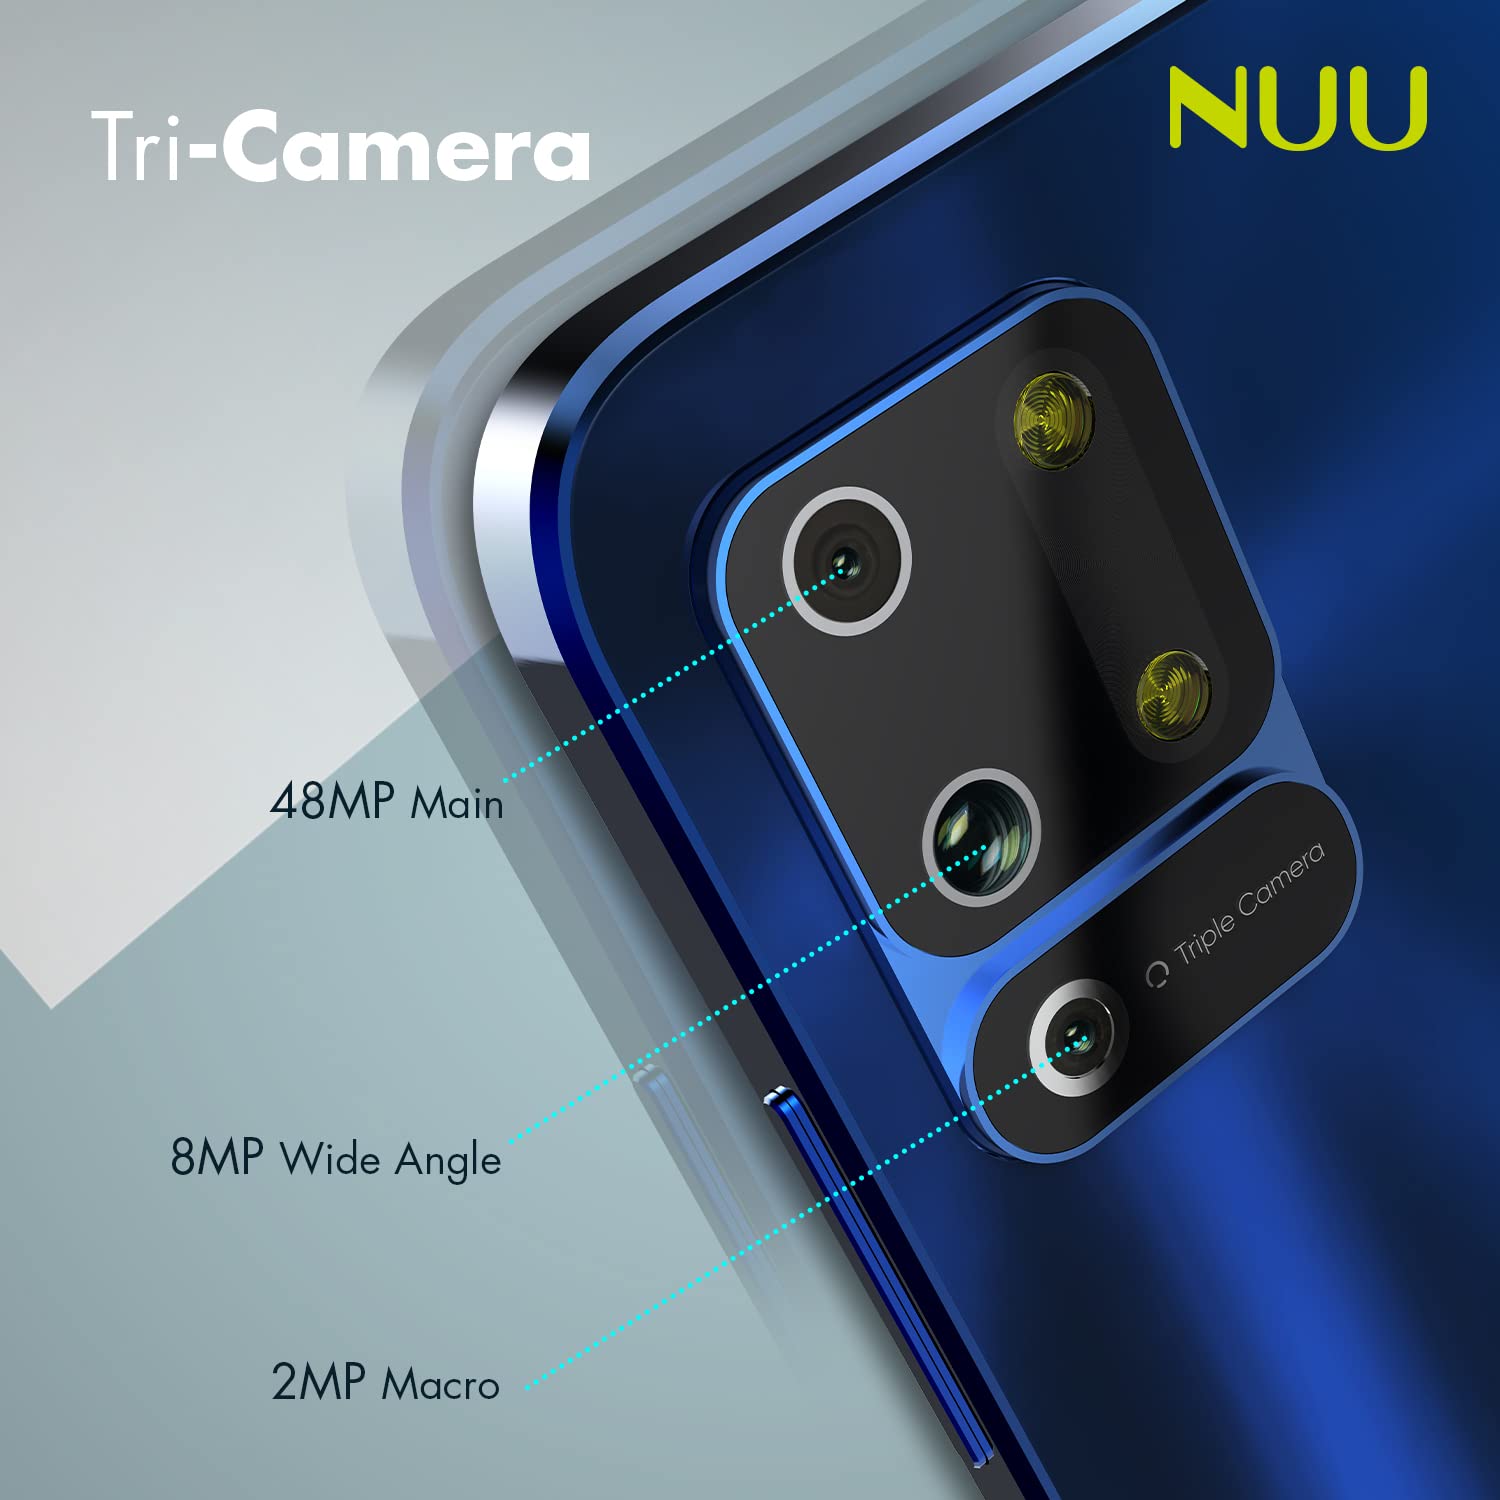 NUU B10 4G LTE Android Smartphone | Unlocked(T-Mobile only) | 6.55” HD+ Display | 48MP Triple-Camera | 64GB + 4GB RAM | 4000mAh Battery | Blue Color Wireless Buds A